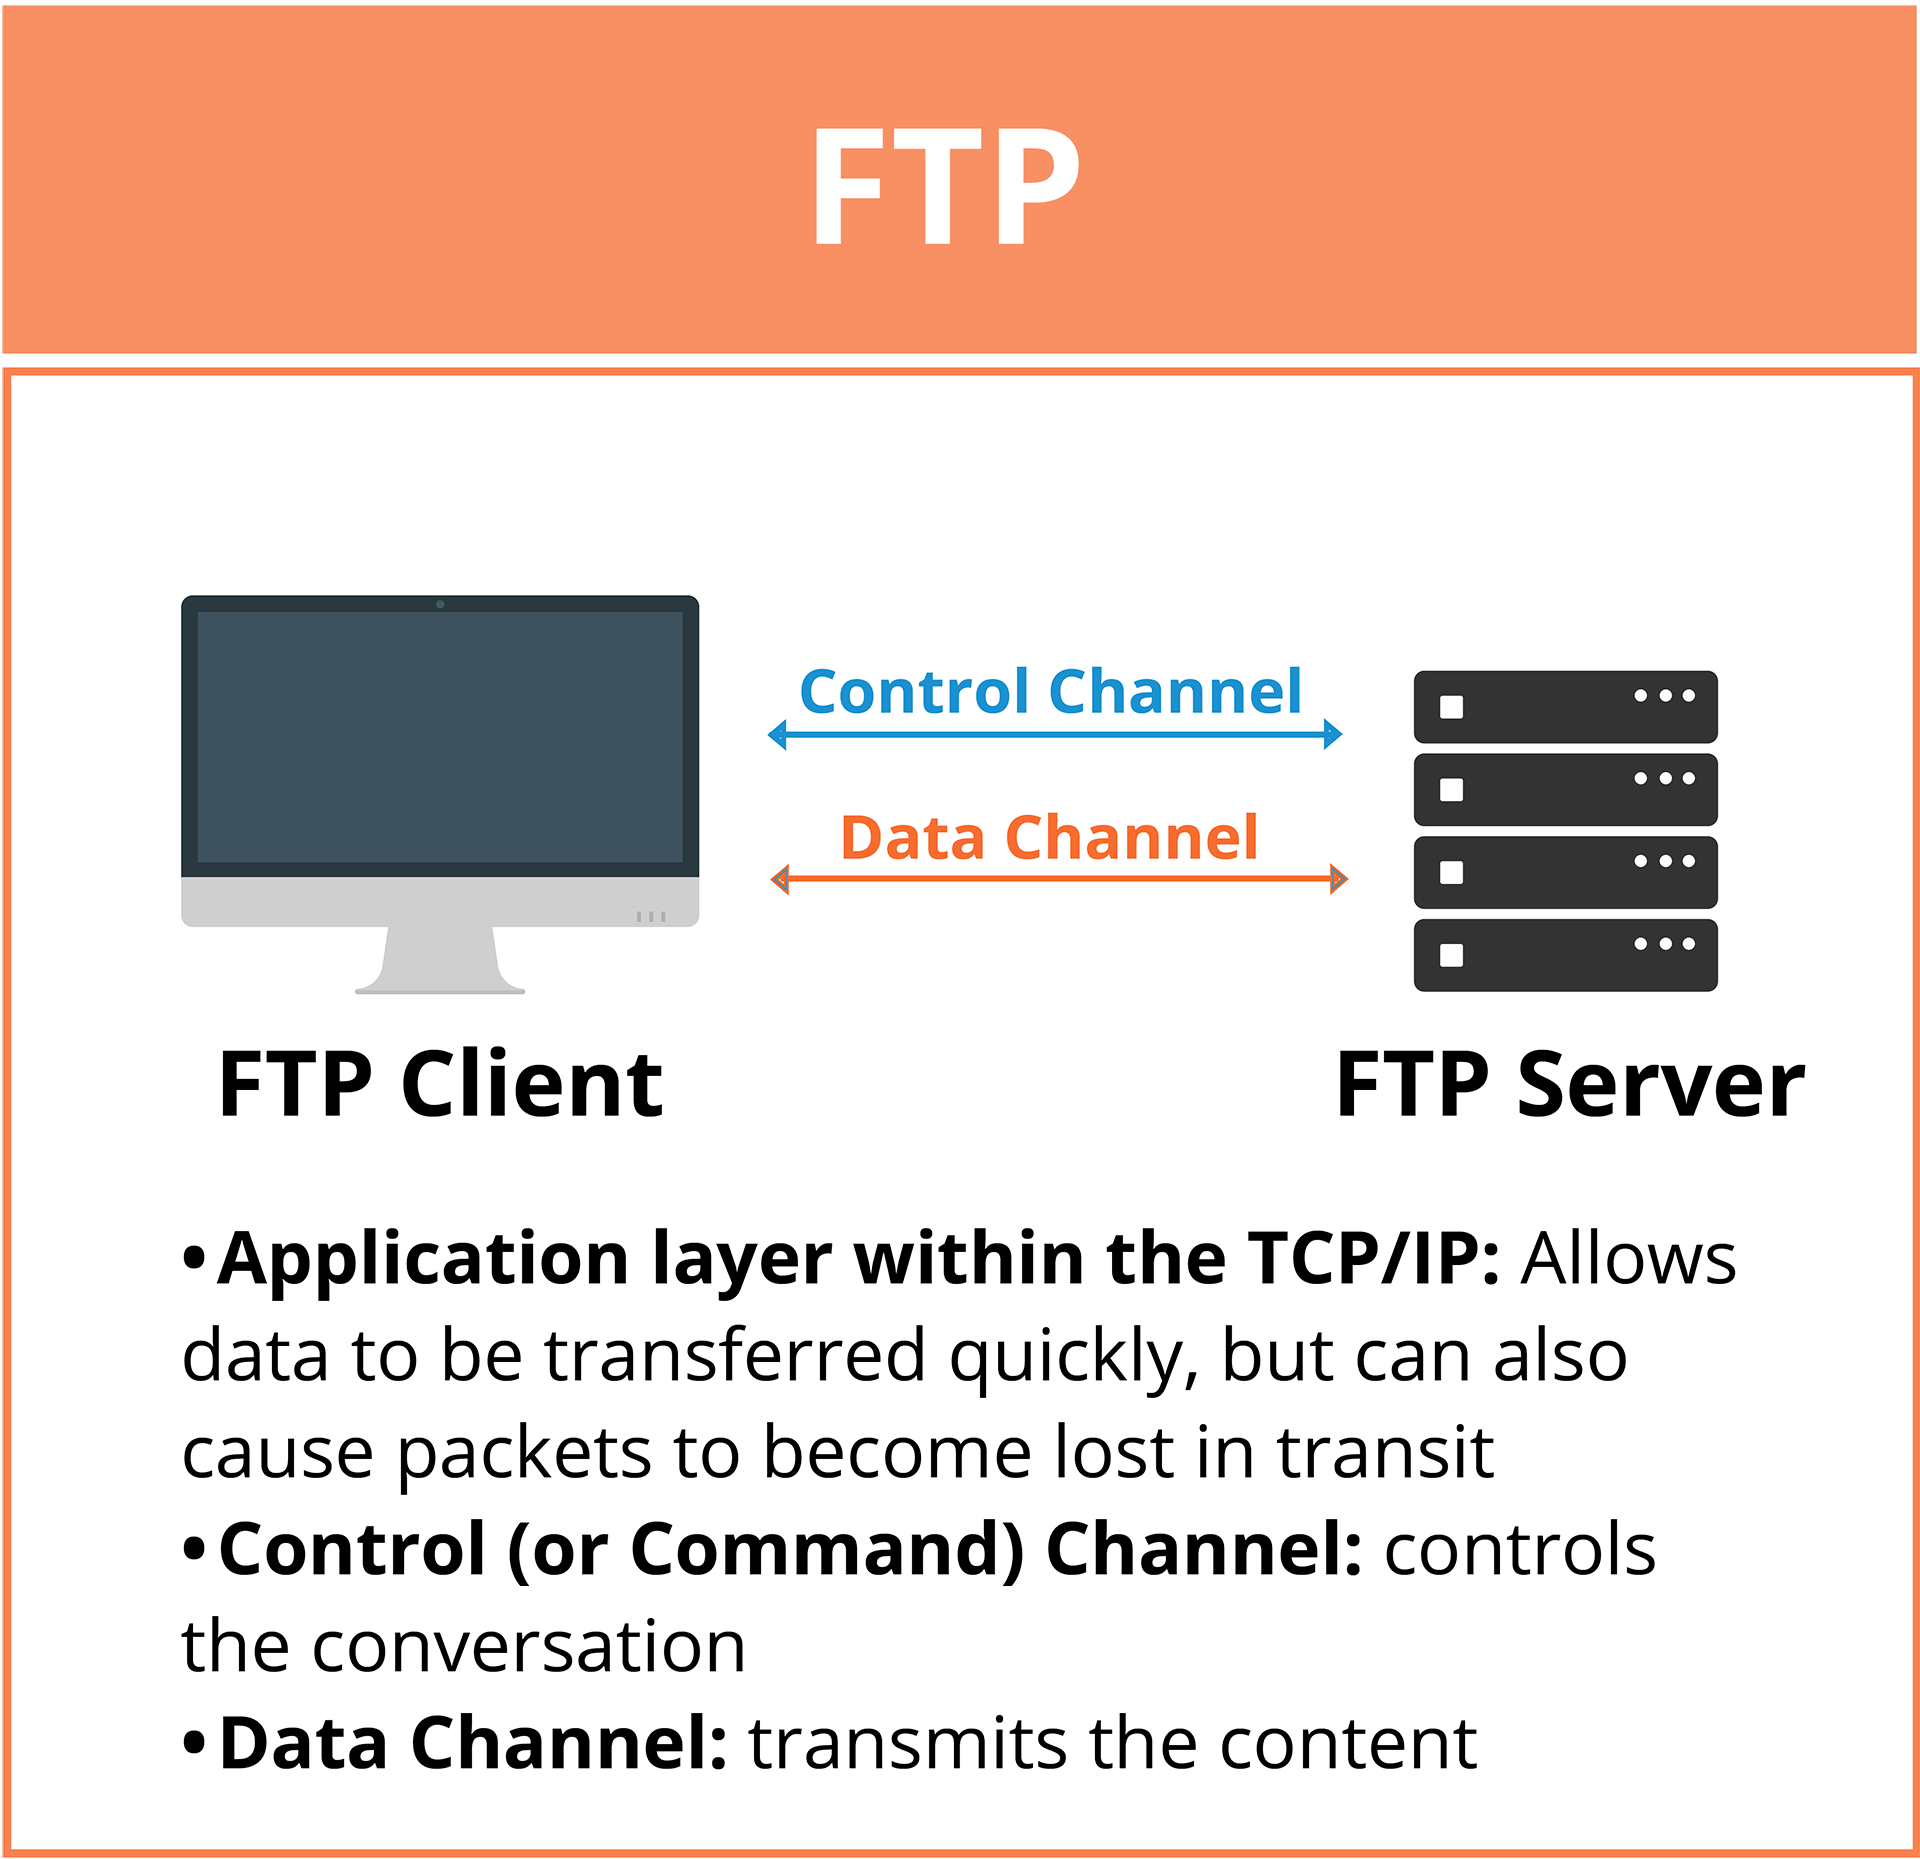 File Transfer Protocol (FTP) graphic explaining that FTP is an application layer within TCP/IP